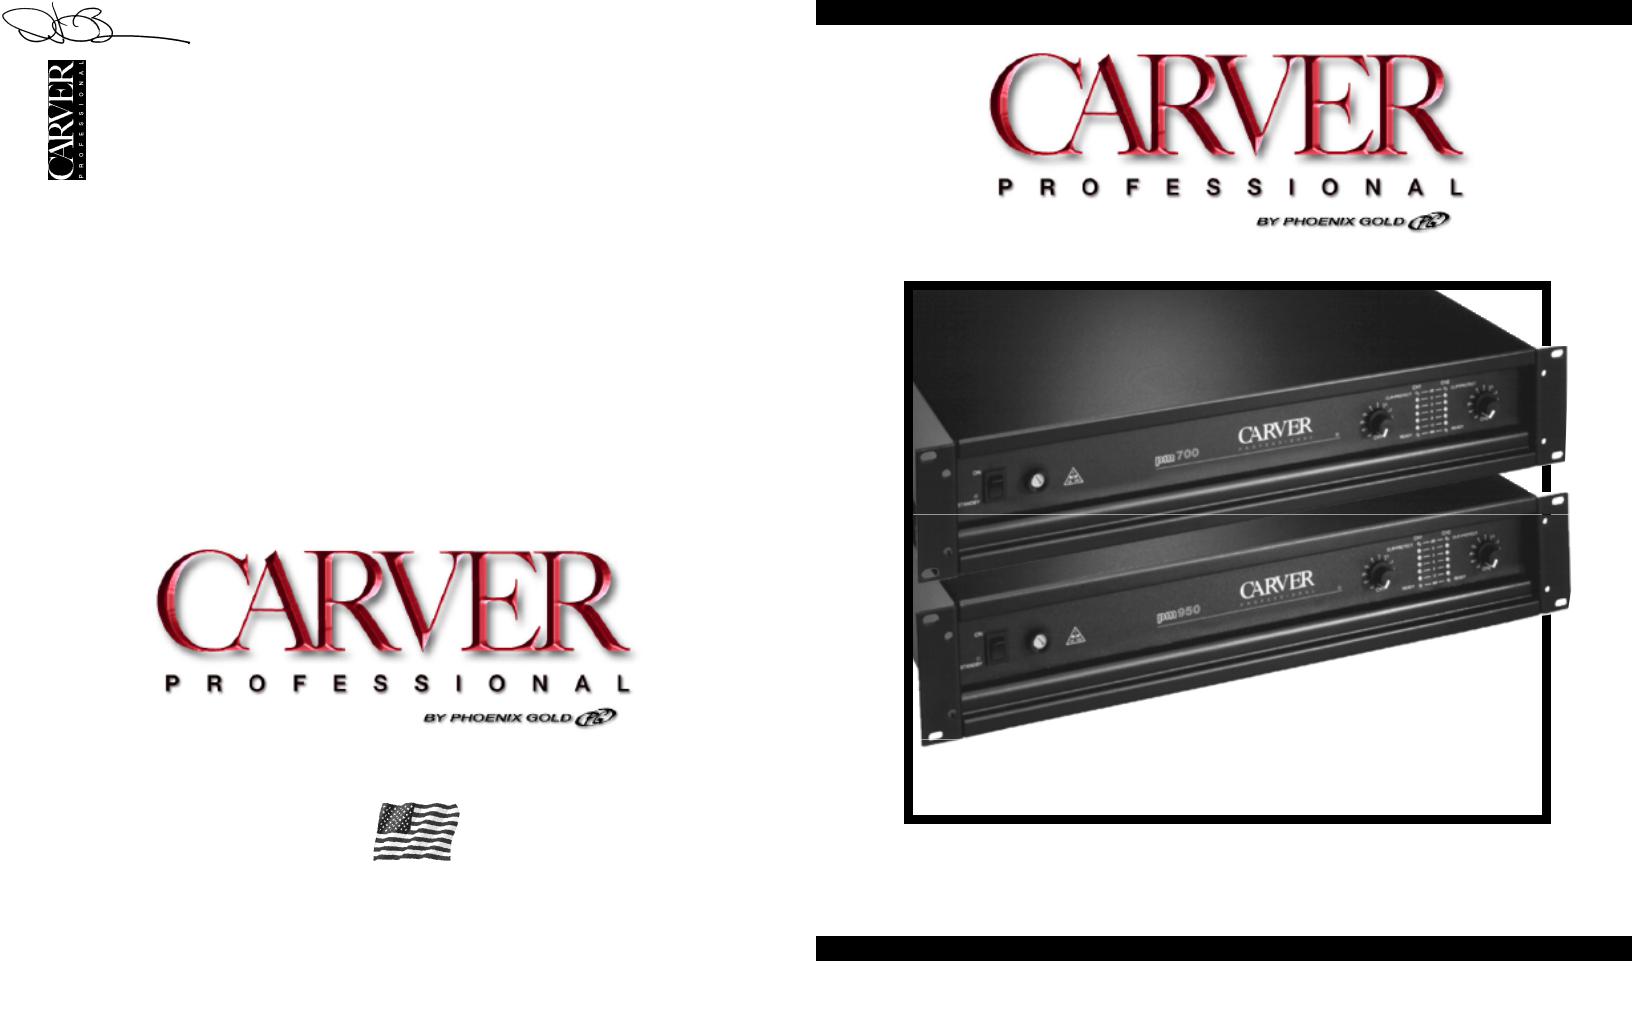 Carver PM-700, PM-900 Owners manual